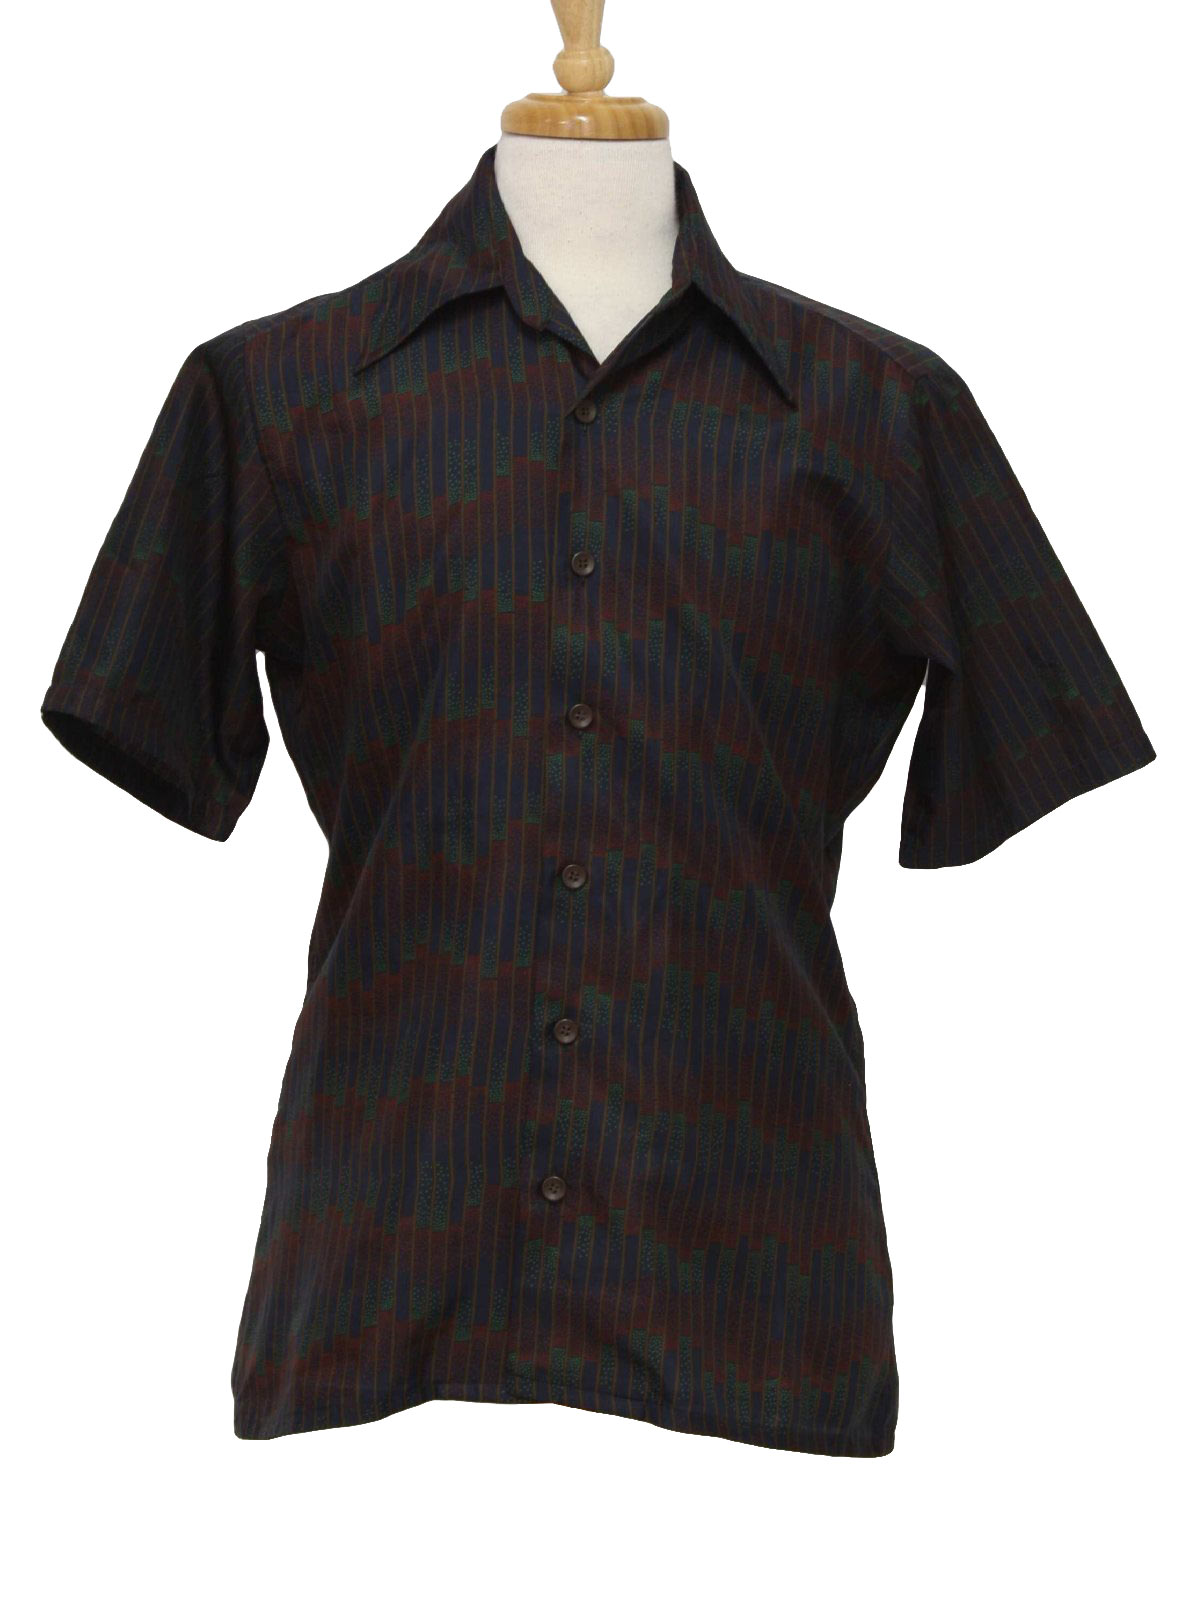 JCPenney Seventies Vintage Print Disco Shirt: 70s -JCPenney- Mens dark ...